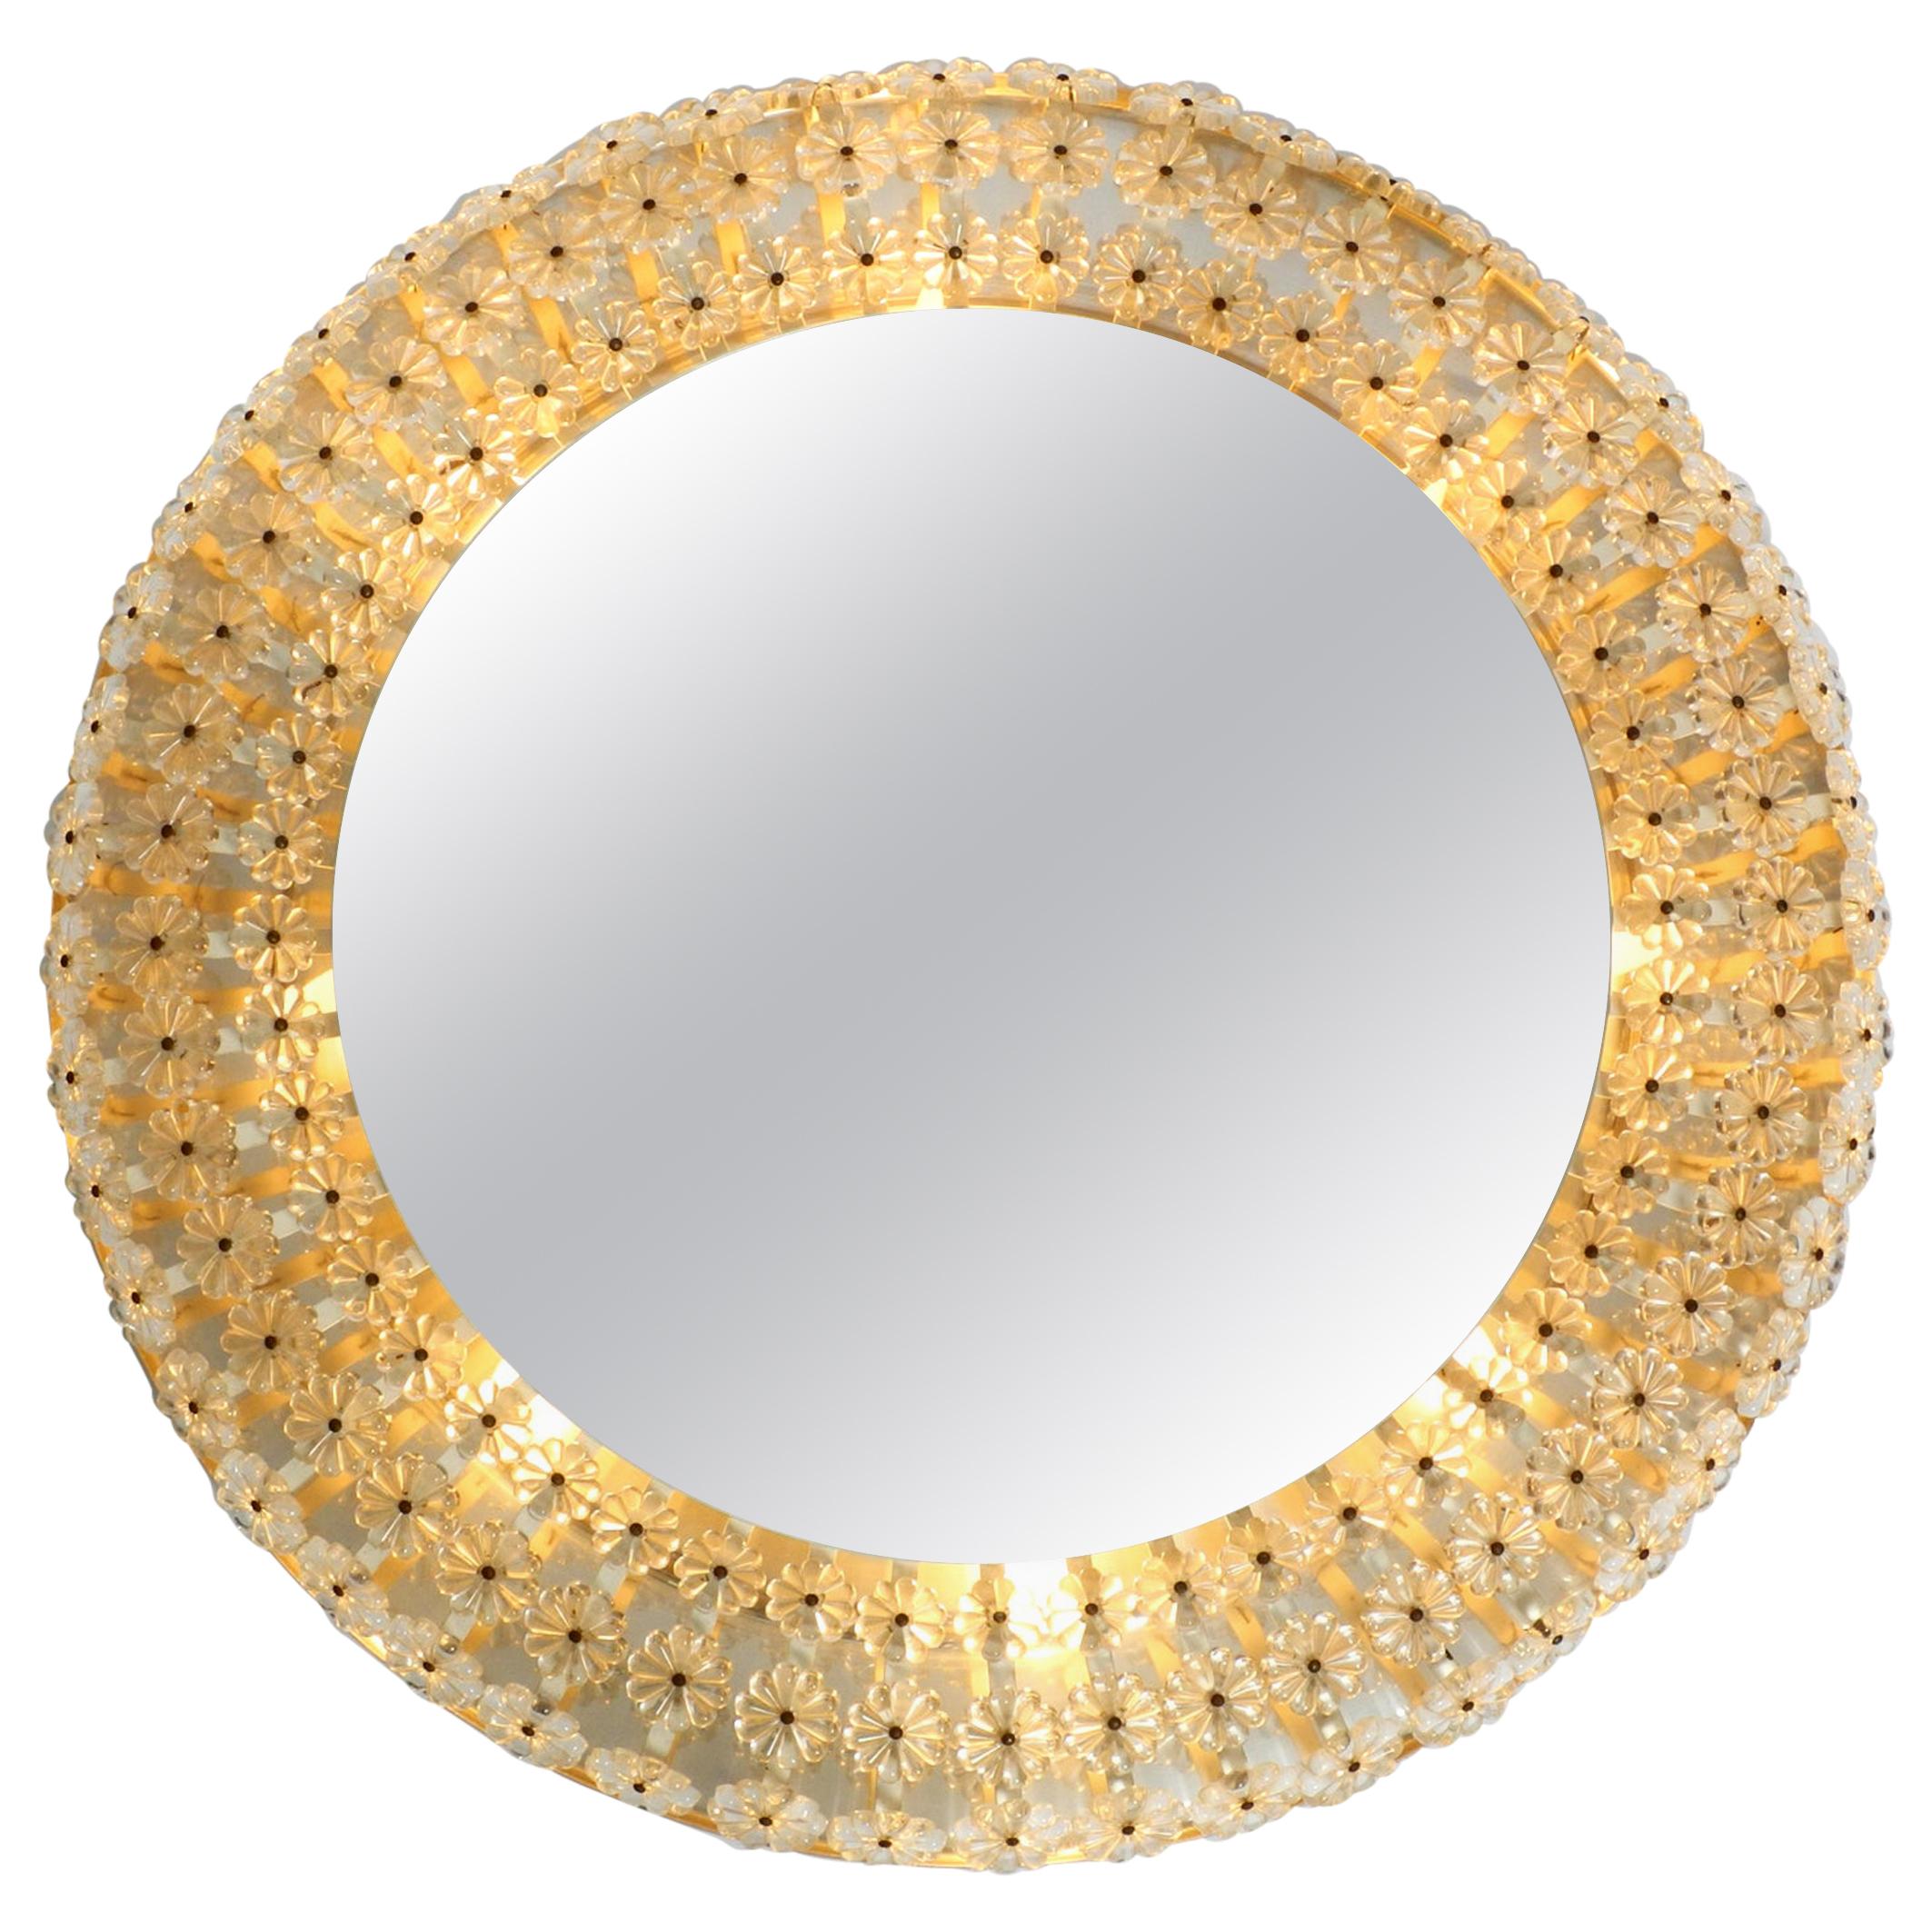 XXL Midcentury Wall Mirror Illuminated with Real Glass Stones by Schöninger